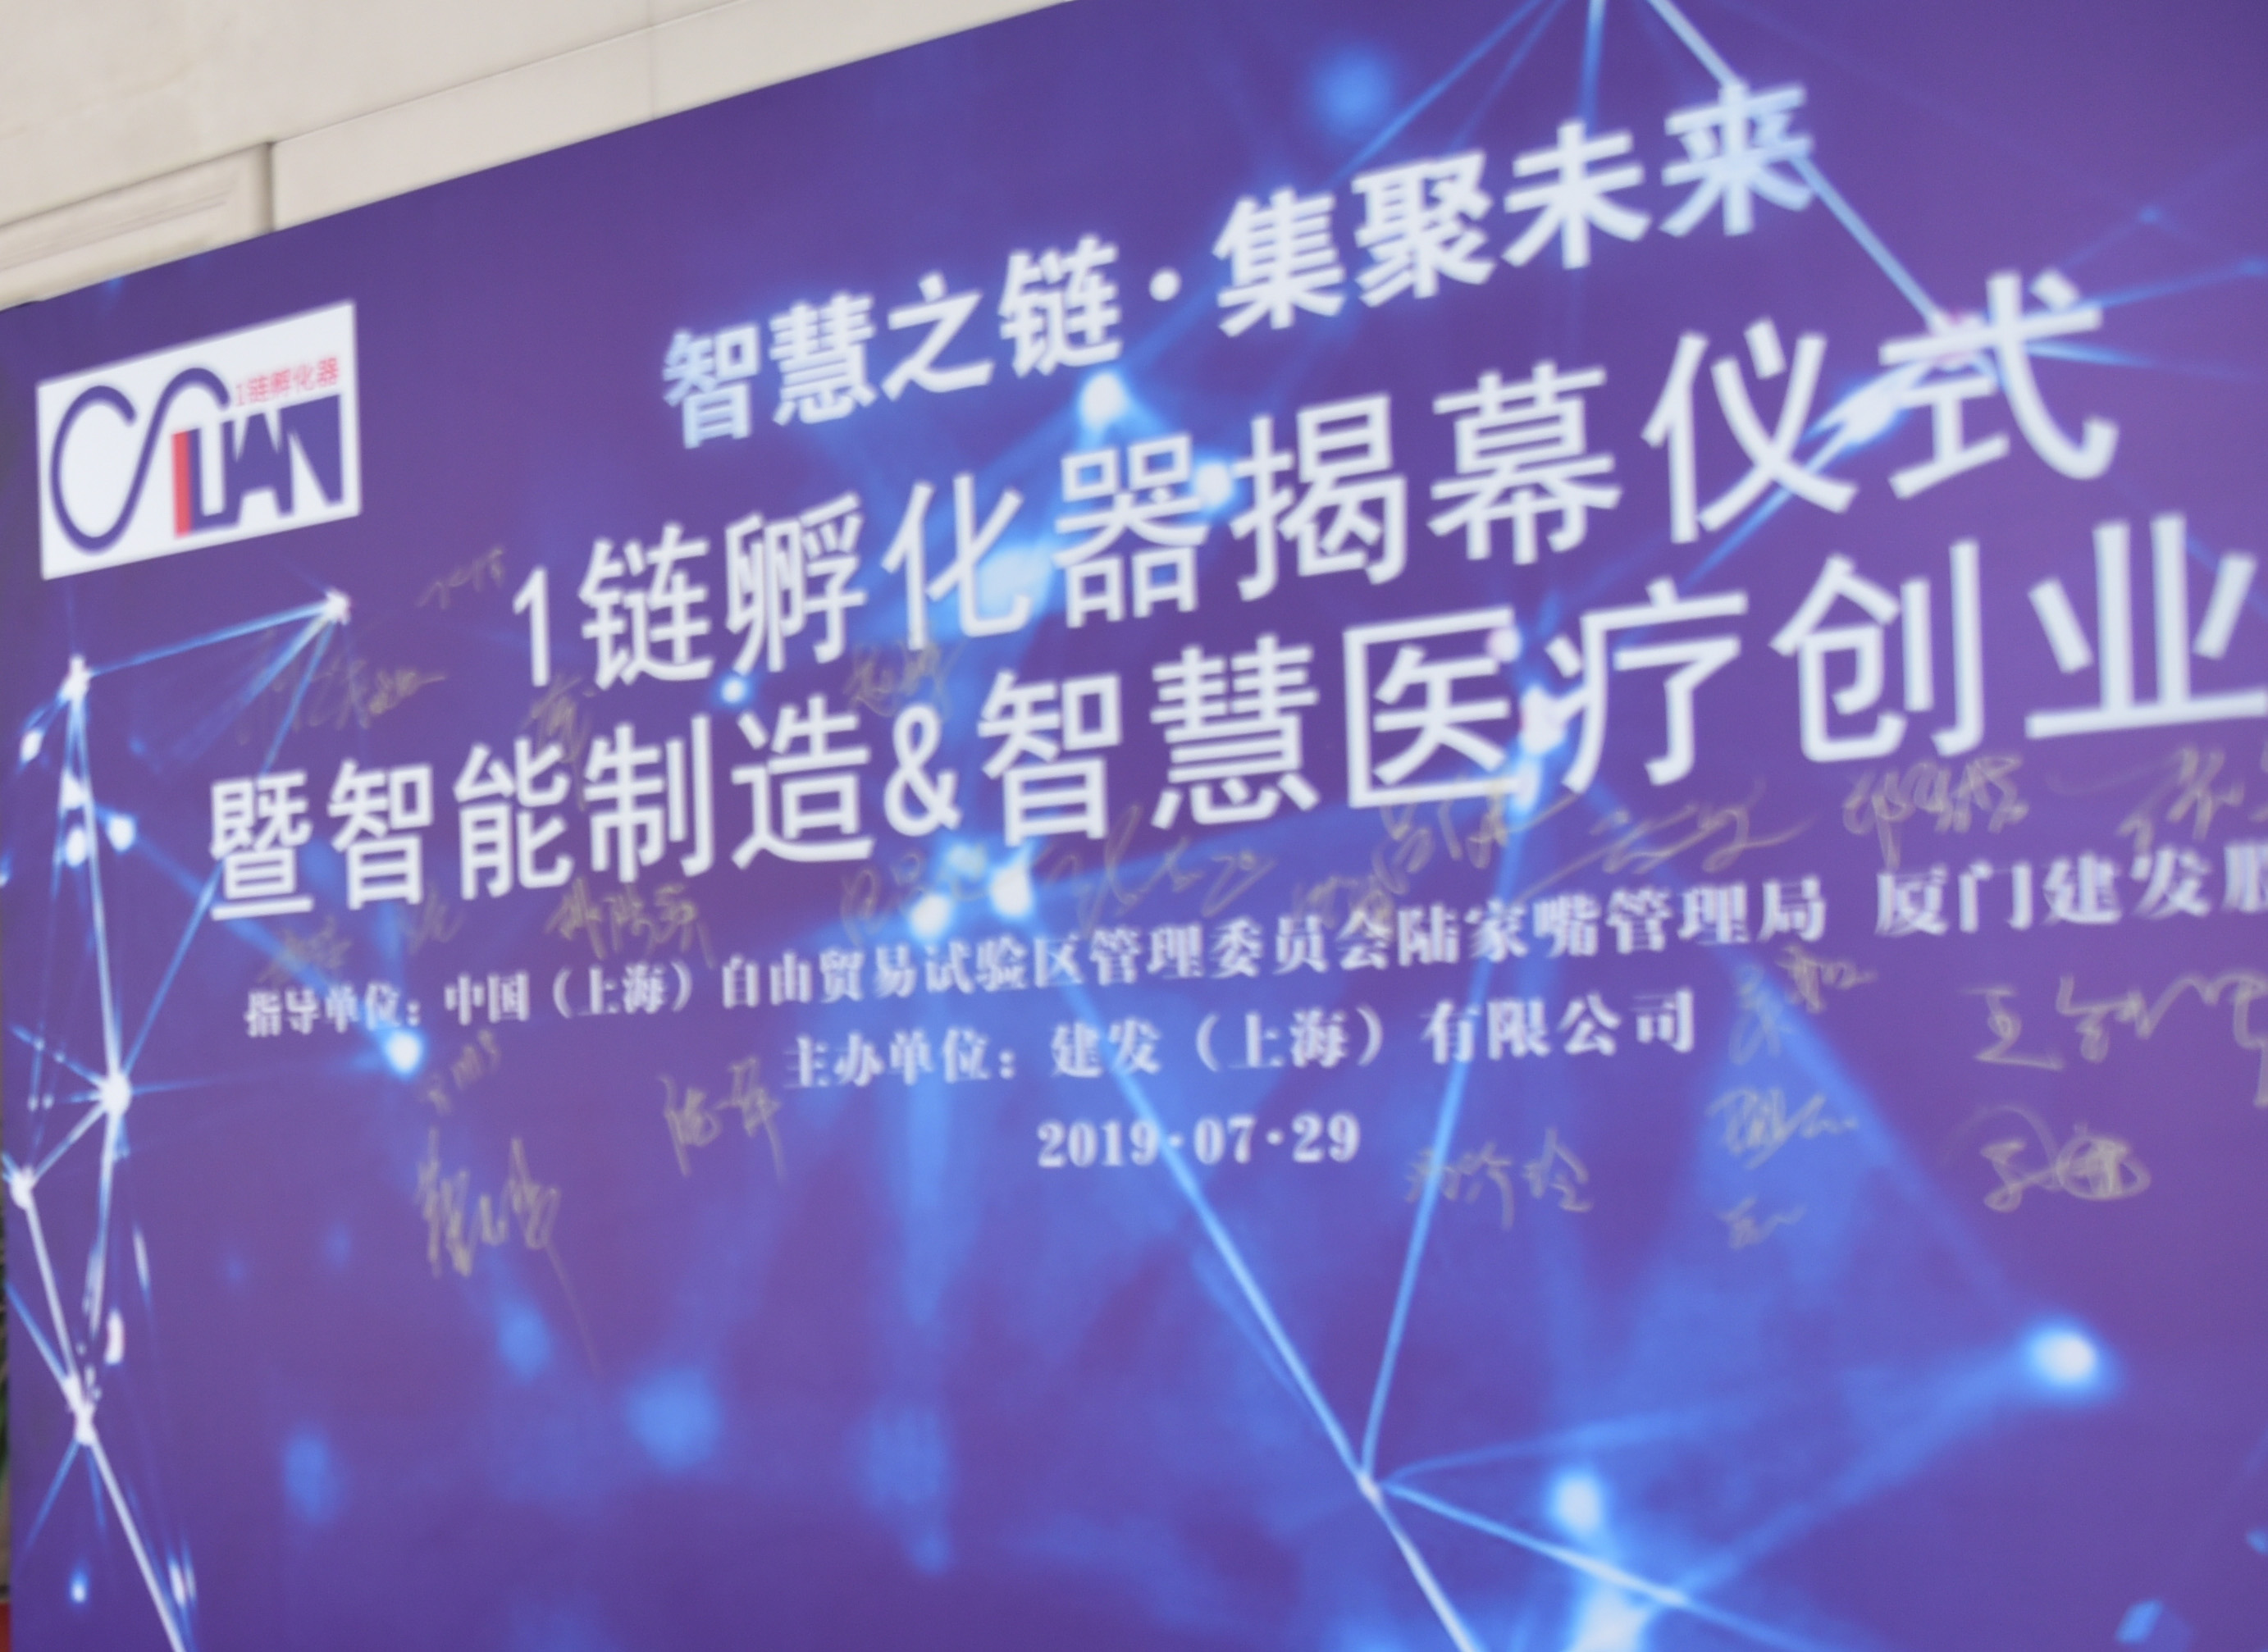 china's first supply chain enabling incubator –  c&d (shanghai) co., ltd "1 chain" incubator is launched in lujiazui